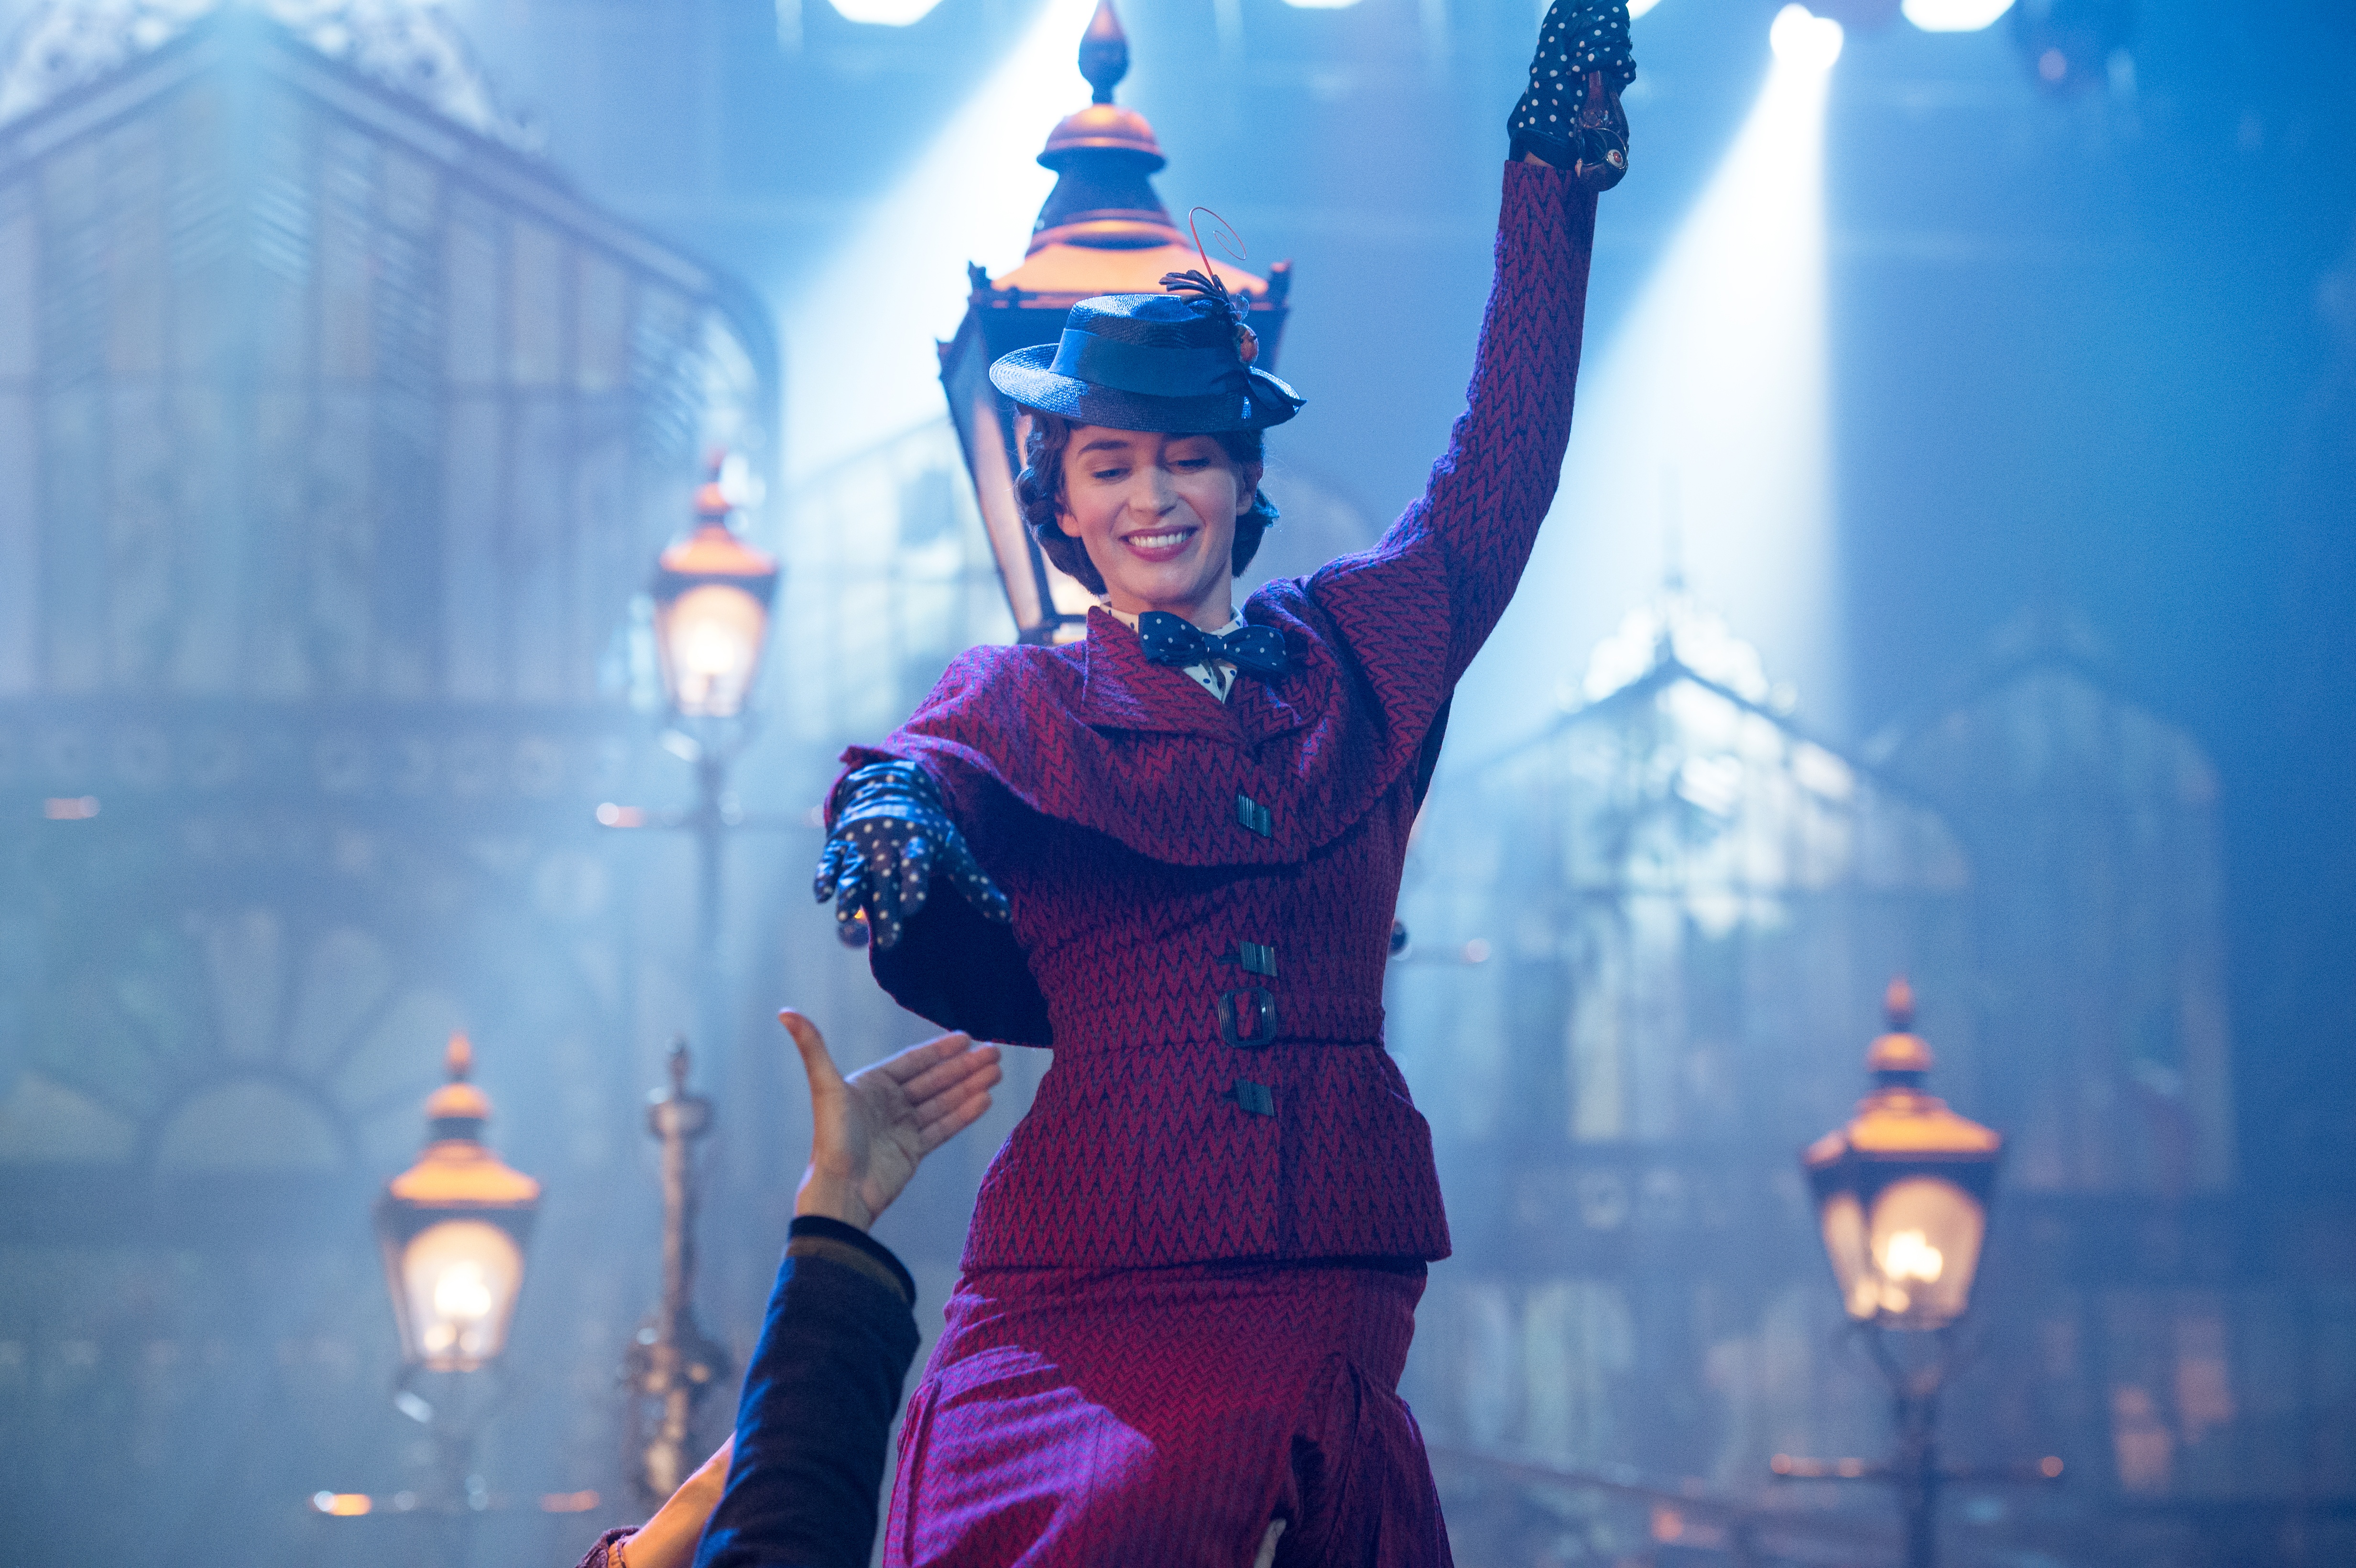 Join Backstage For A Live Tweeted Q A With Mary Poppins Returns Star Emily Blunt